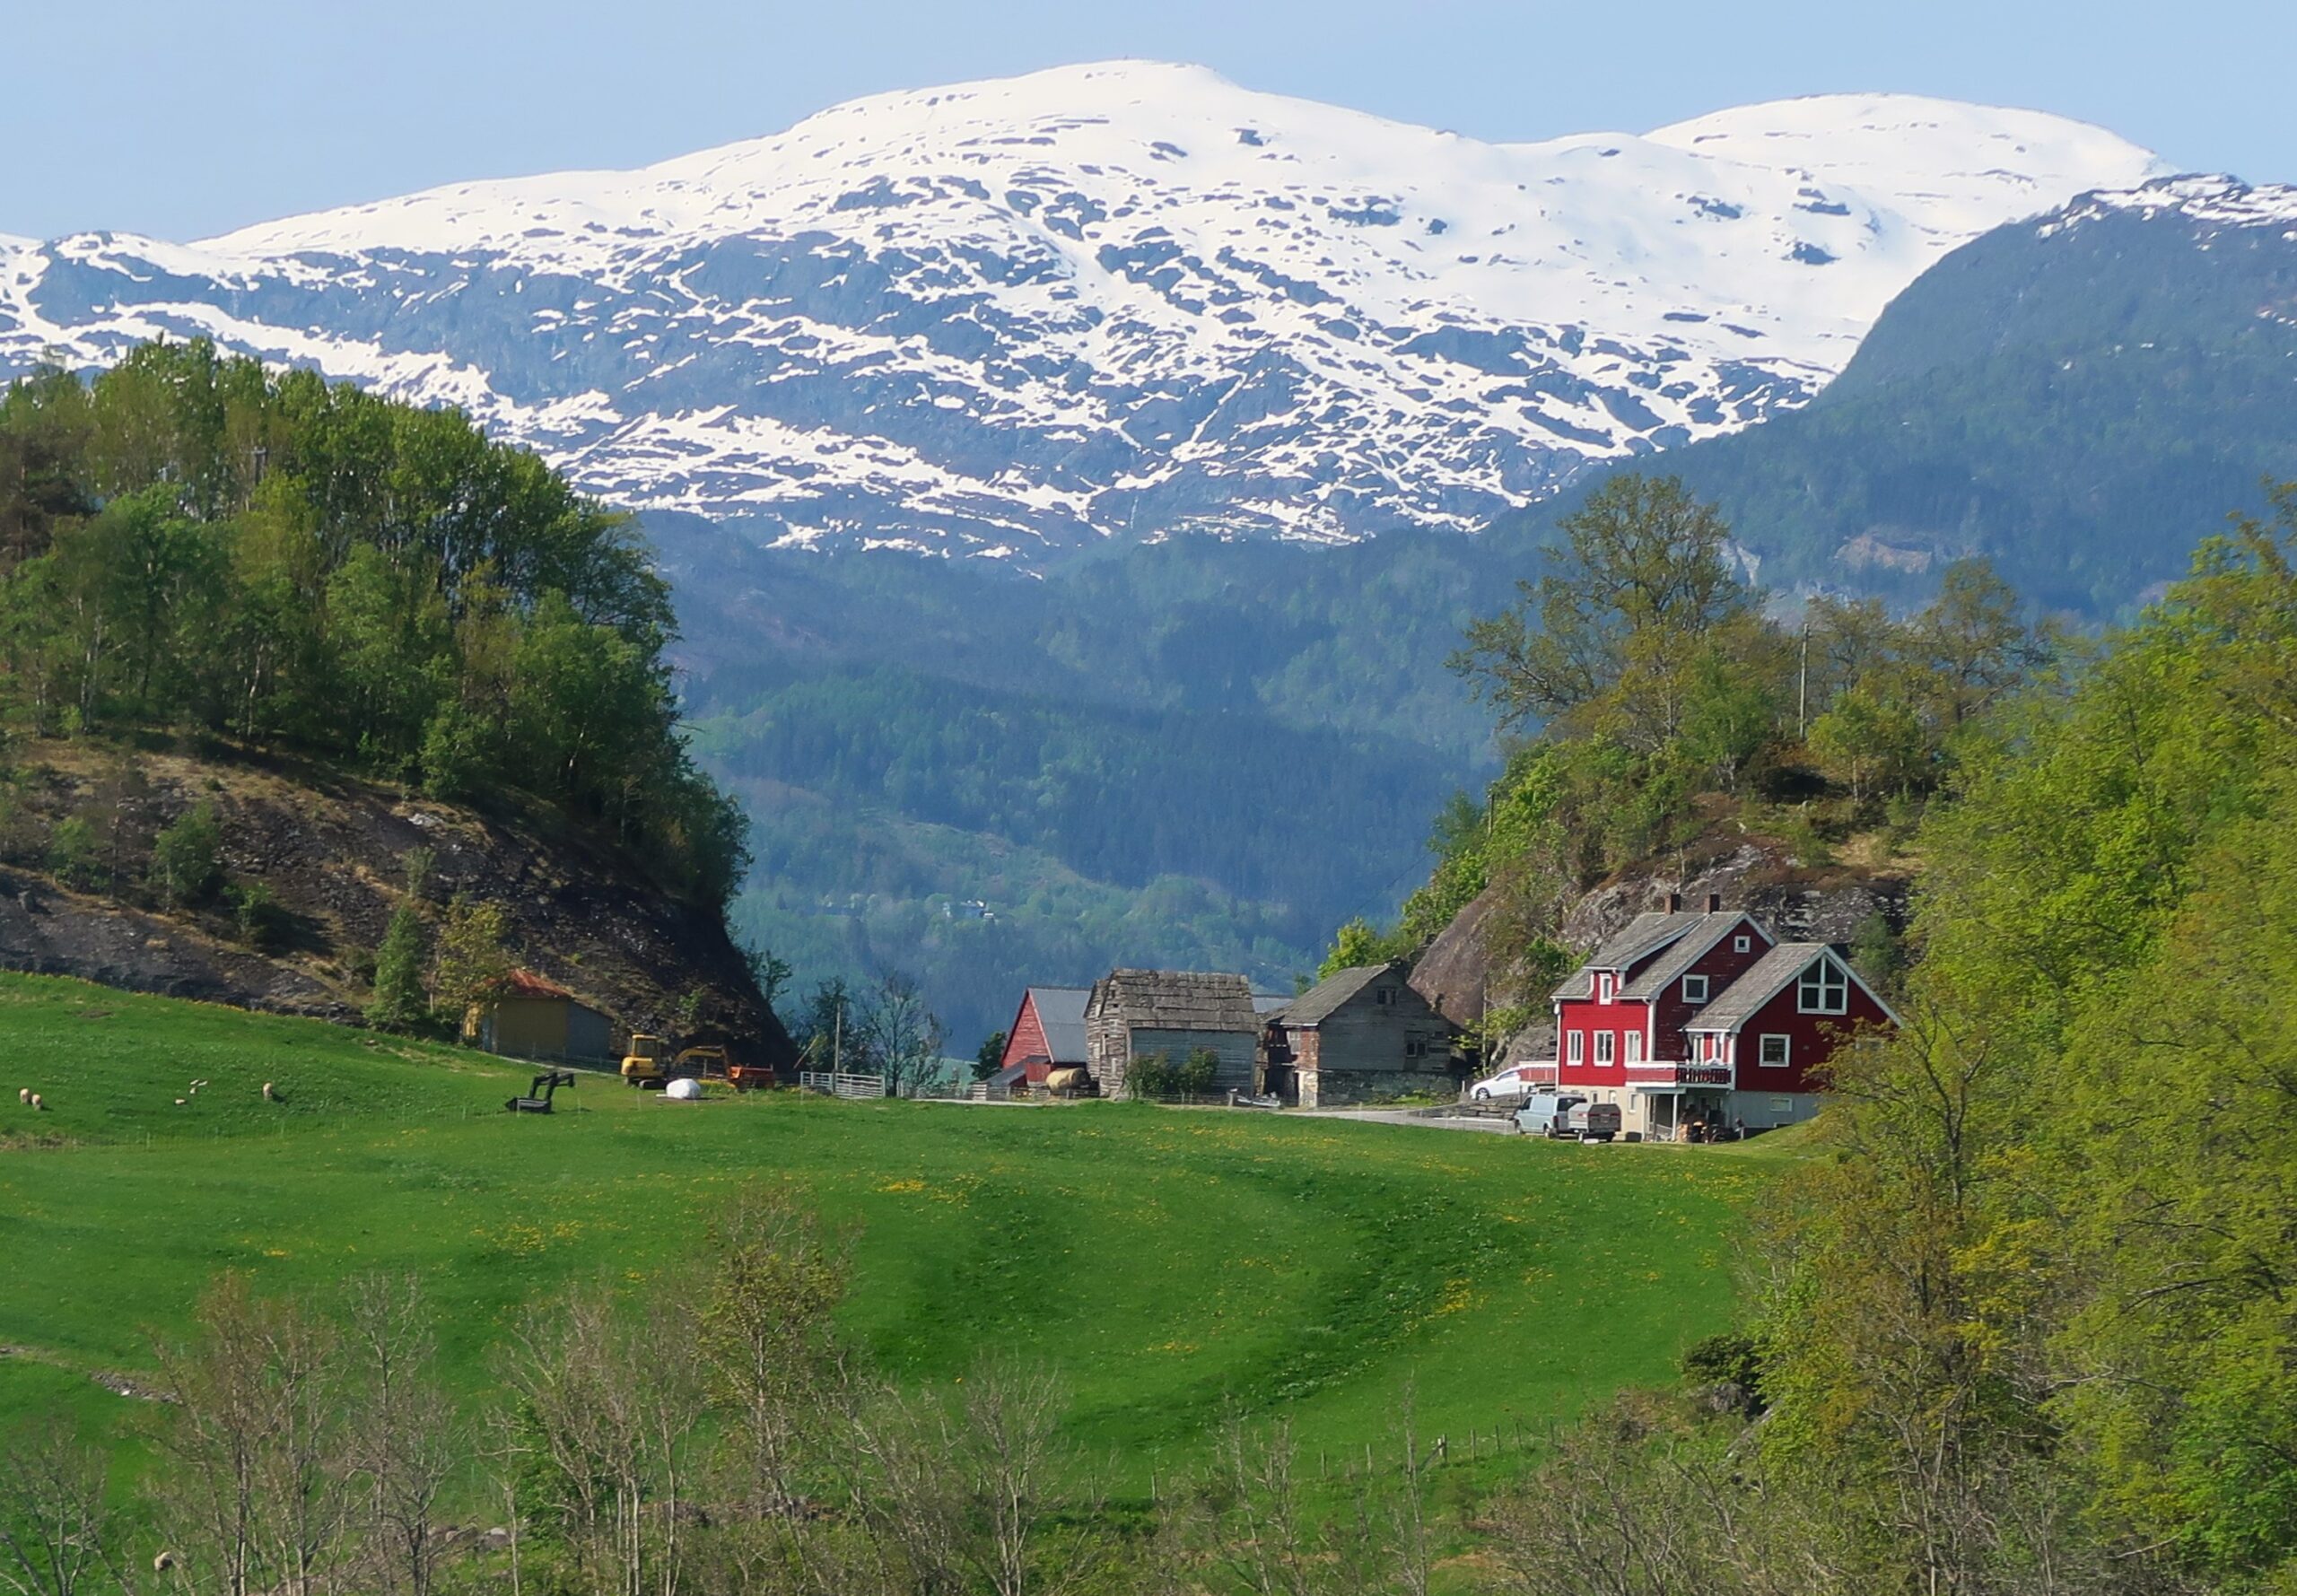 Nature on Hardangerfjord, a region in Norway. (Photo by Eric Dregni)